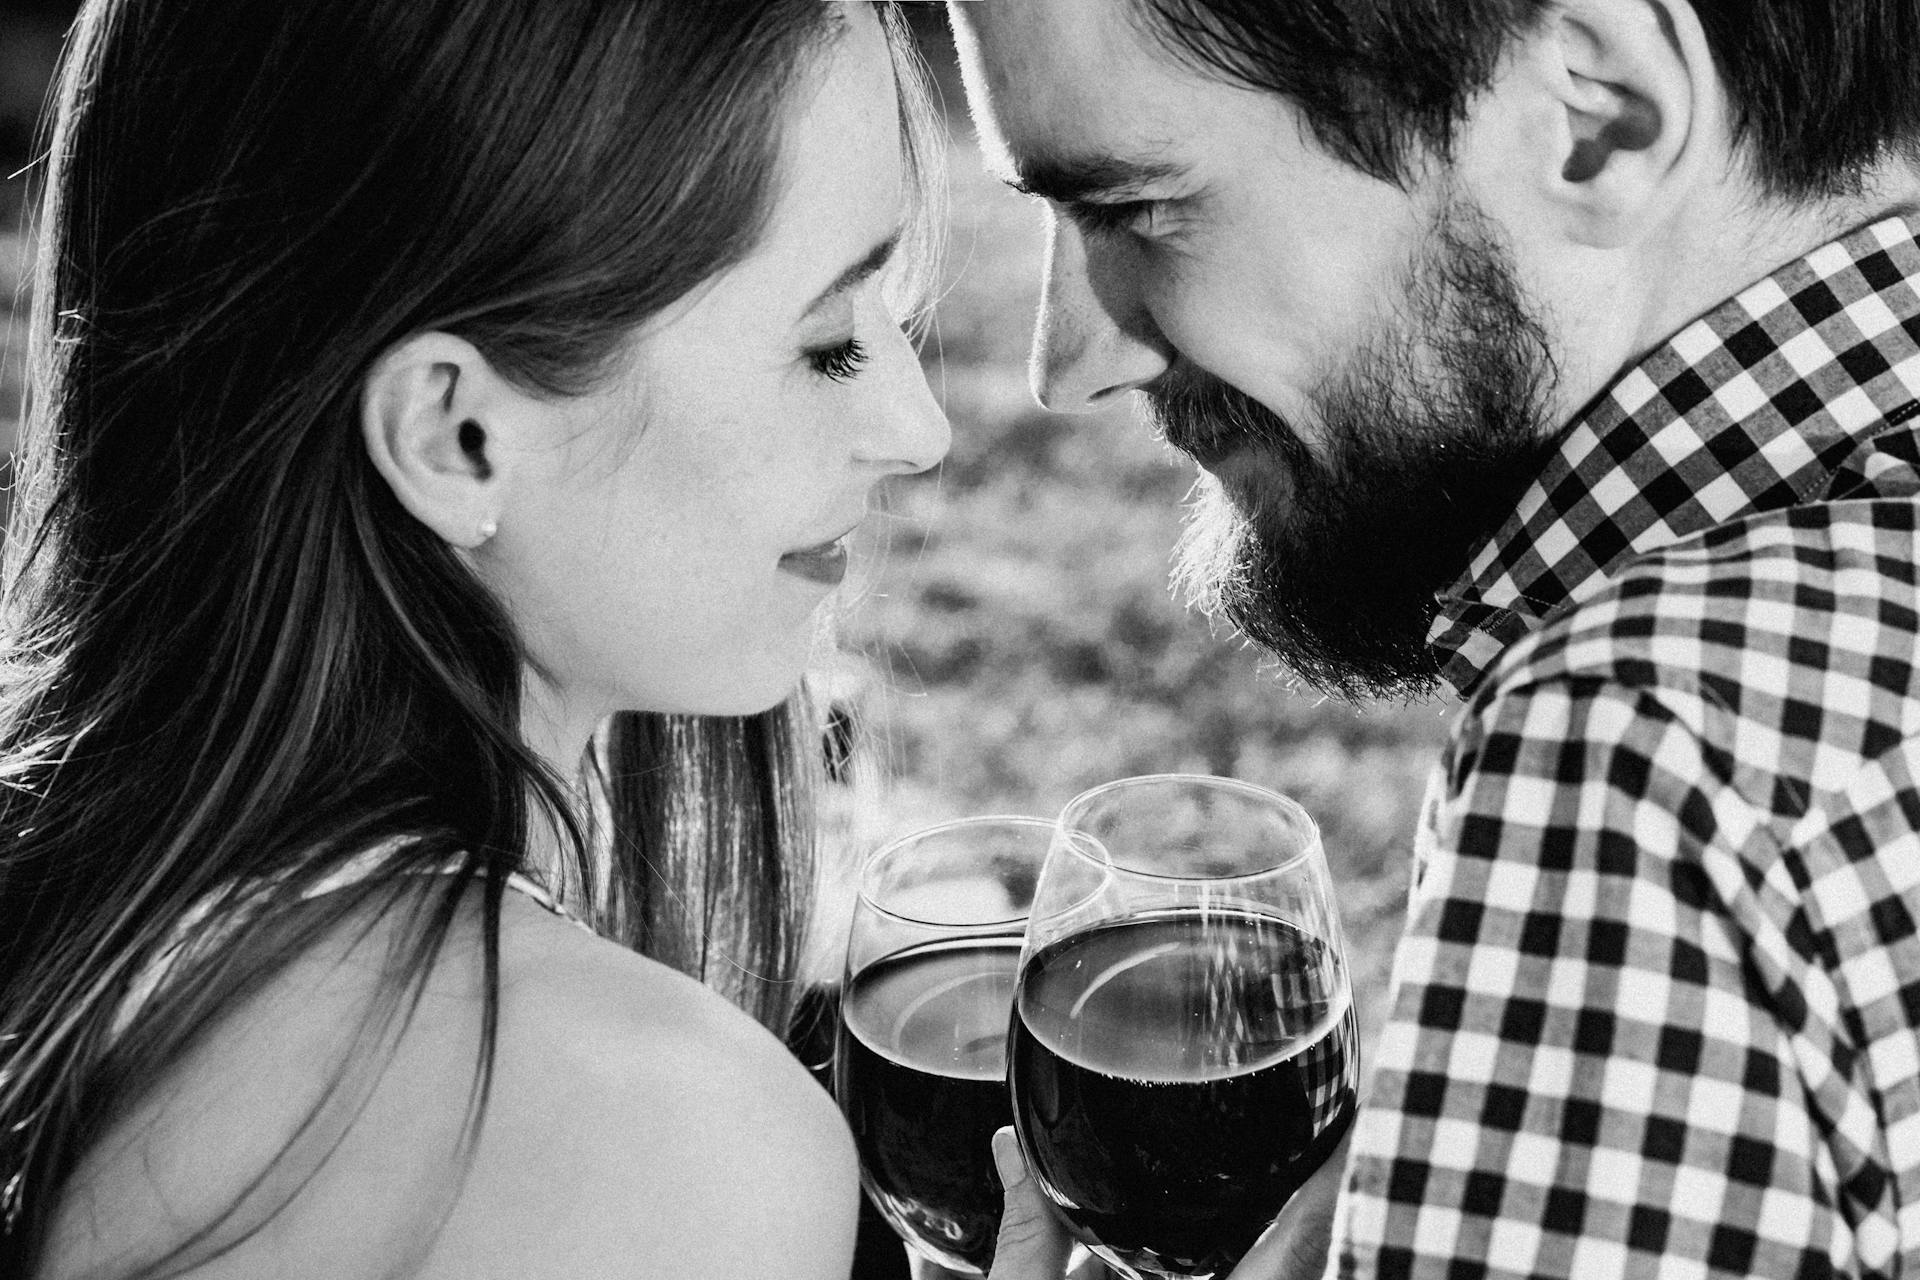 A loving couple enjoying their drinks outdoors | Source: Pexels